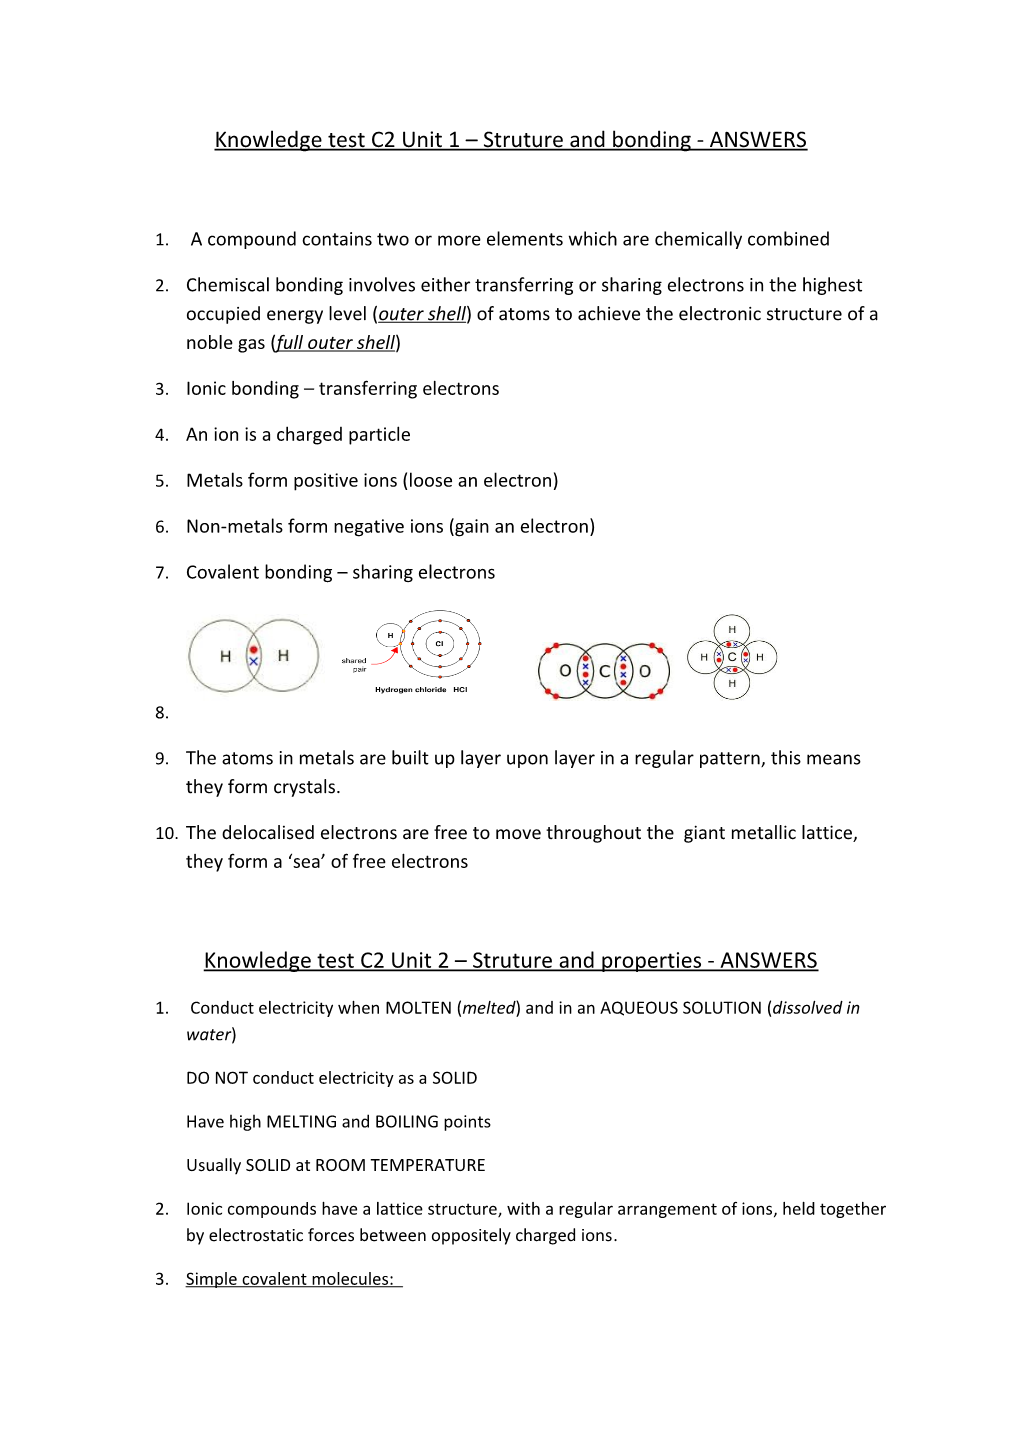 Knowledge Test C2 Unit 1 Struture and Bonding - ANSWERS